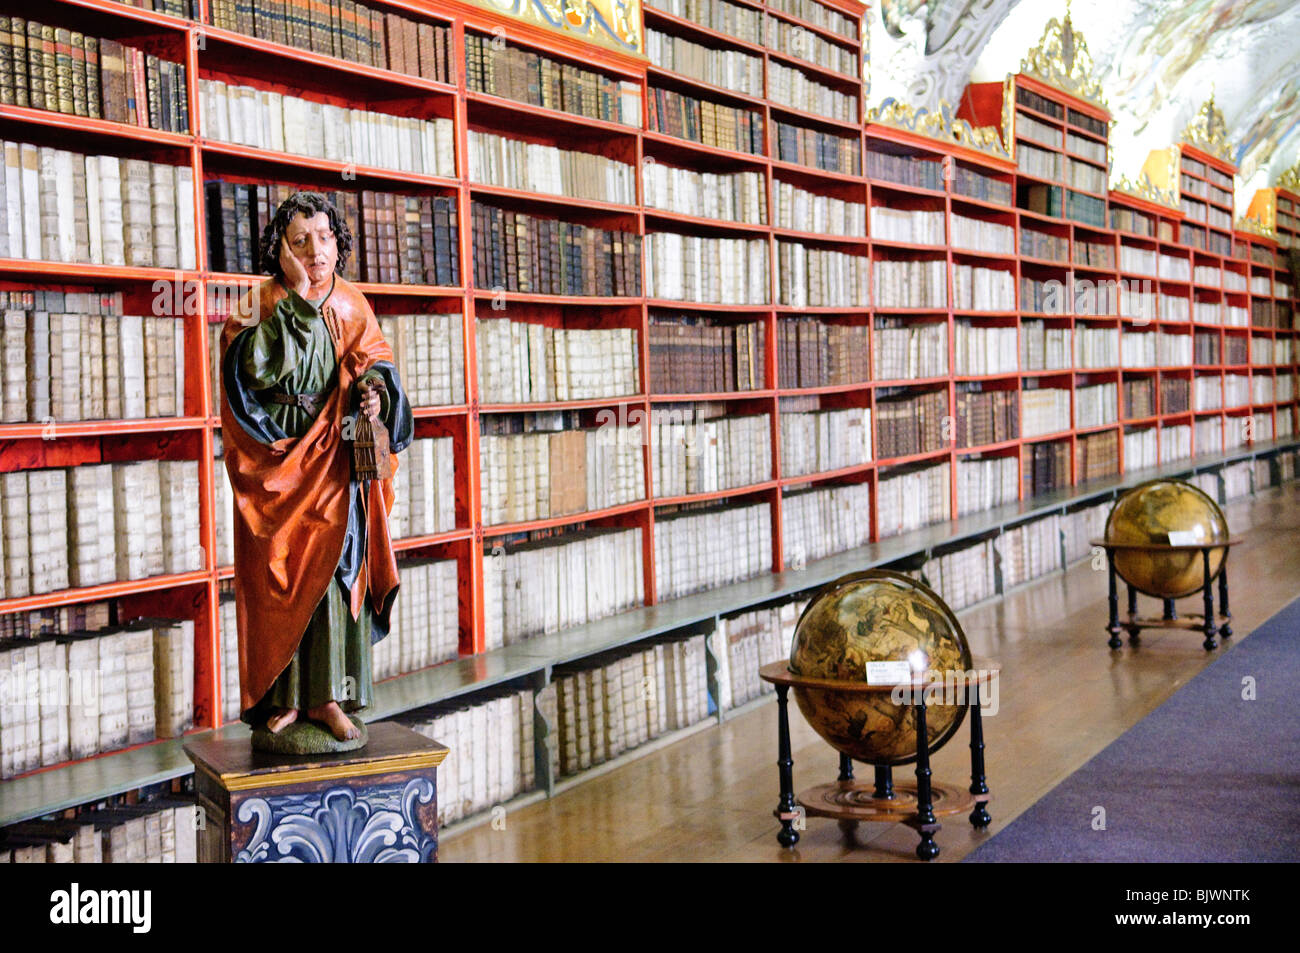 PRAGUE, Czech Republic - Strahov Library. Statue at left is of St. John the Evangelist. Book holder at right was specially designed for this library and keeps the books facing the reader as the wheel is turned. Stock Photo